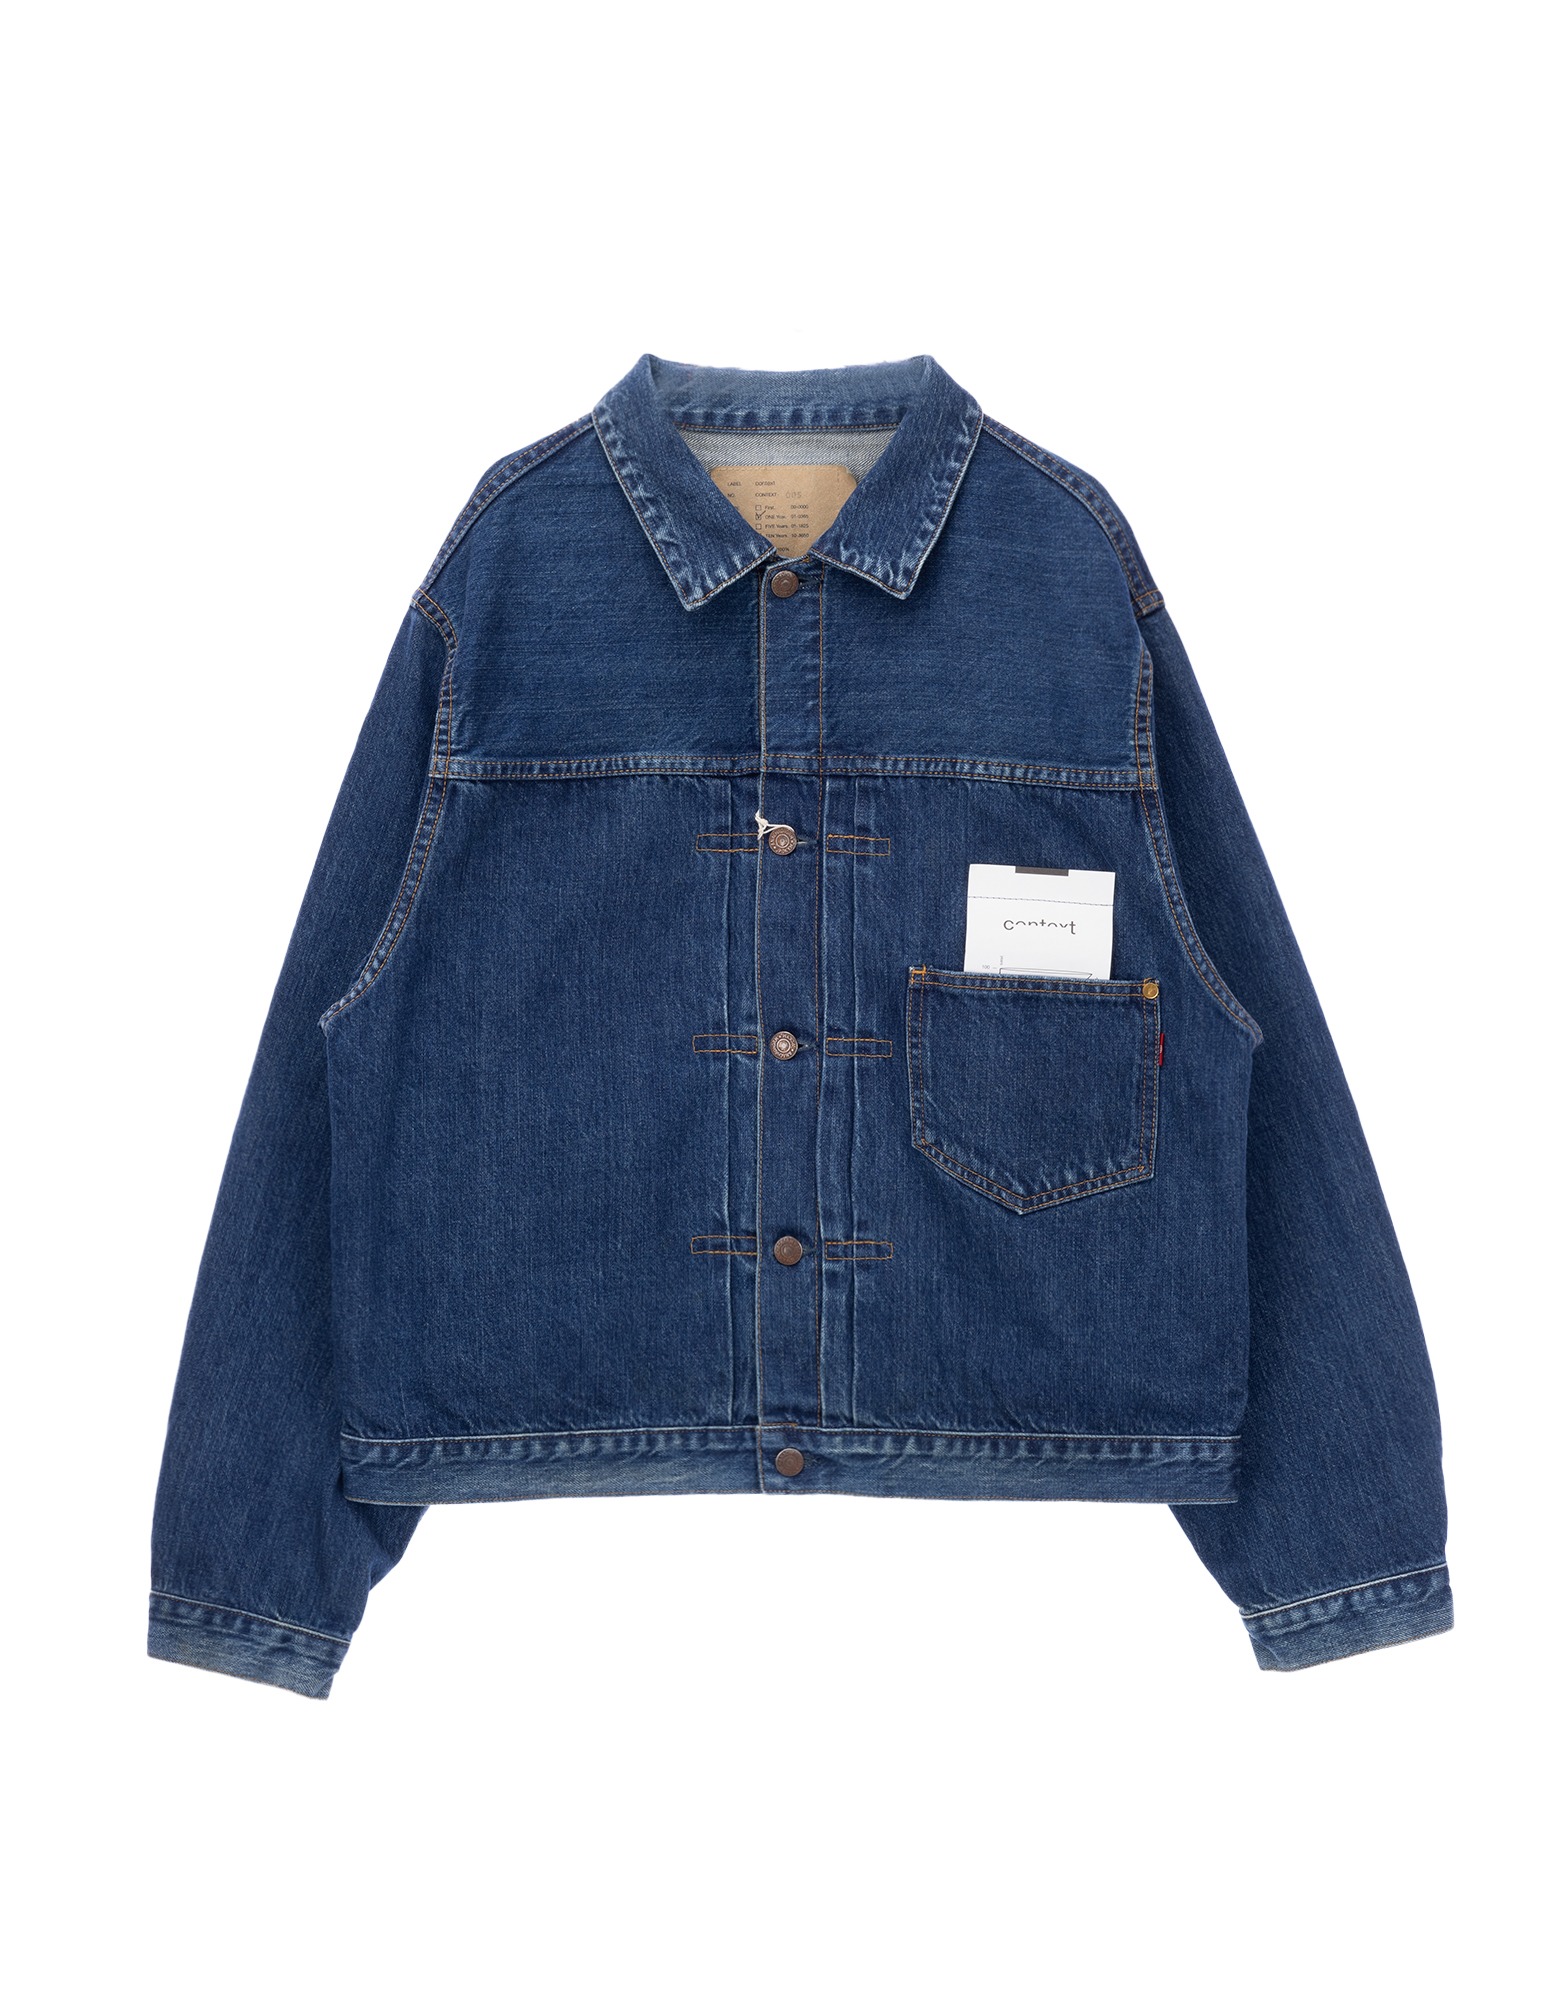 CONTEXT-005-1Y FRONT TUCK DENIM JACKET 1 YEAR (Used Wash)